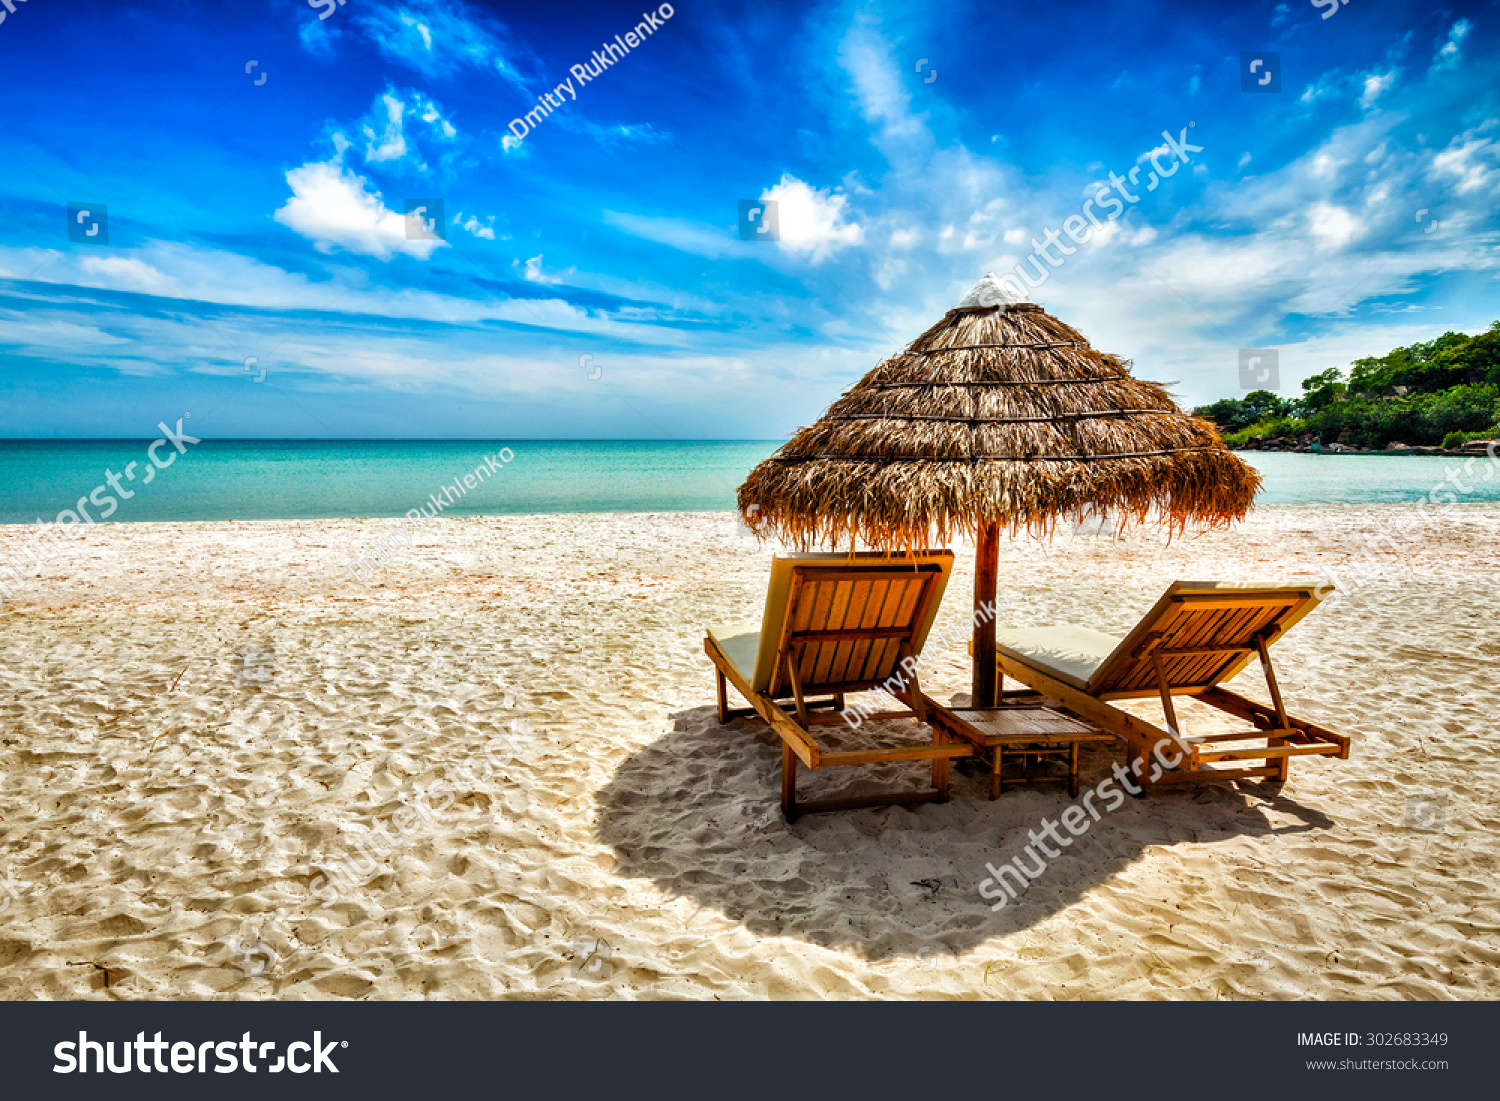 Vacation holidays background wallpaper - two beach lounge chairs under tent on beach. Sihanoukville, Cambodia #302683349